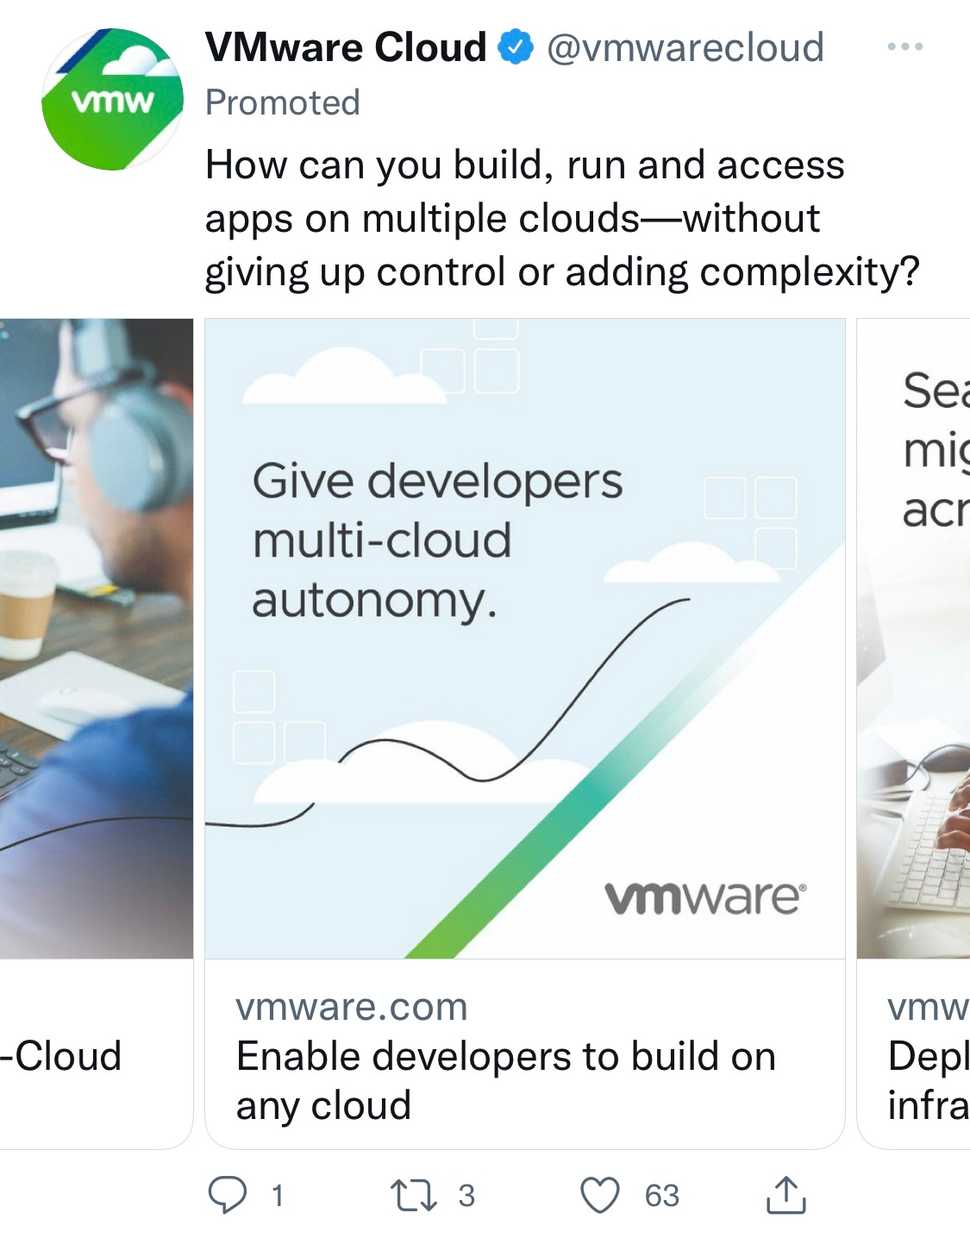 An image displaying a carousel ad for VMWare Cloud